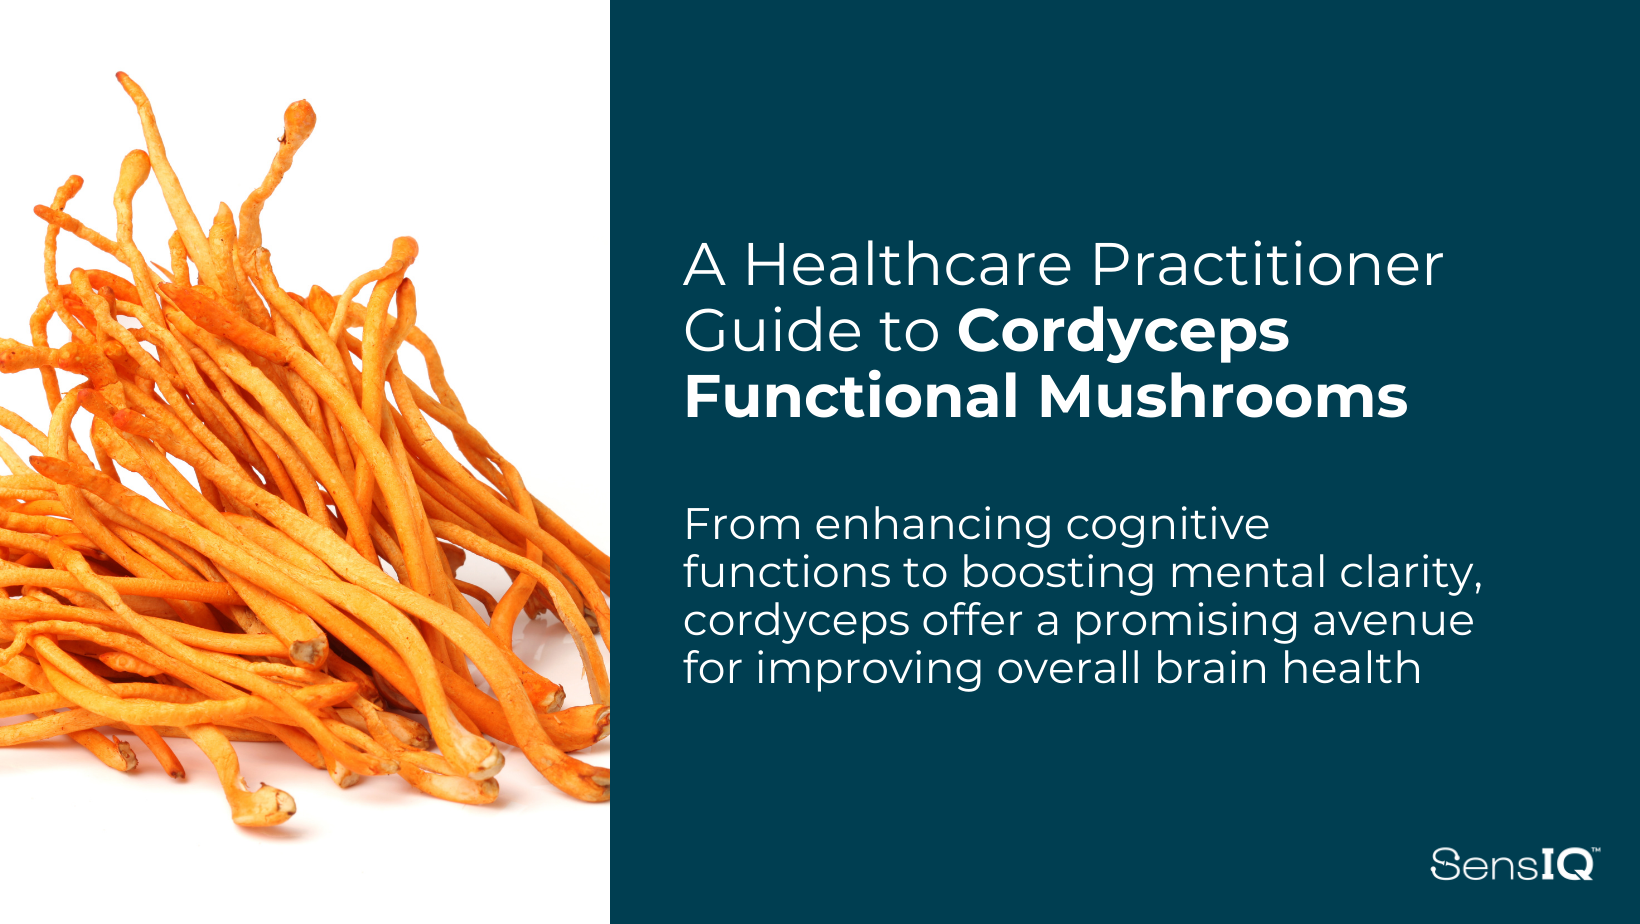 A Healthcare Practitioner Guide to Cordyceps Functional Mushrooms